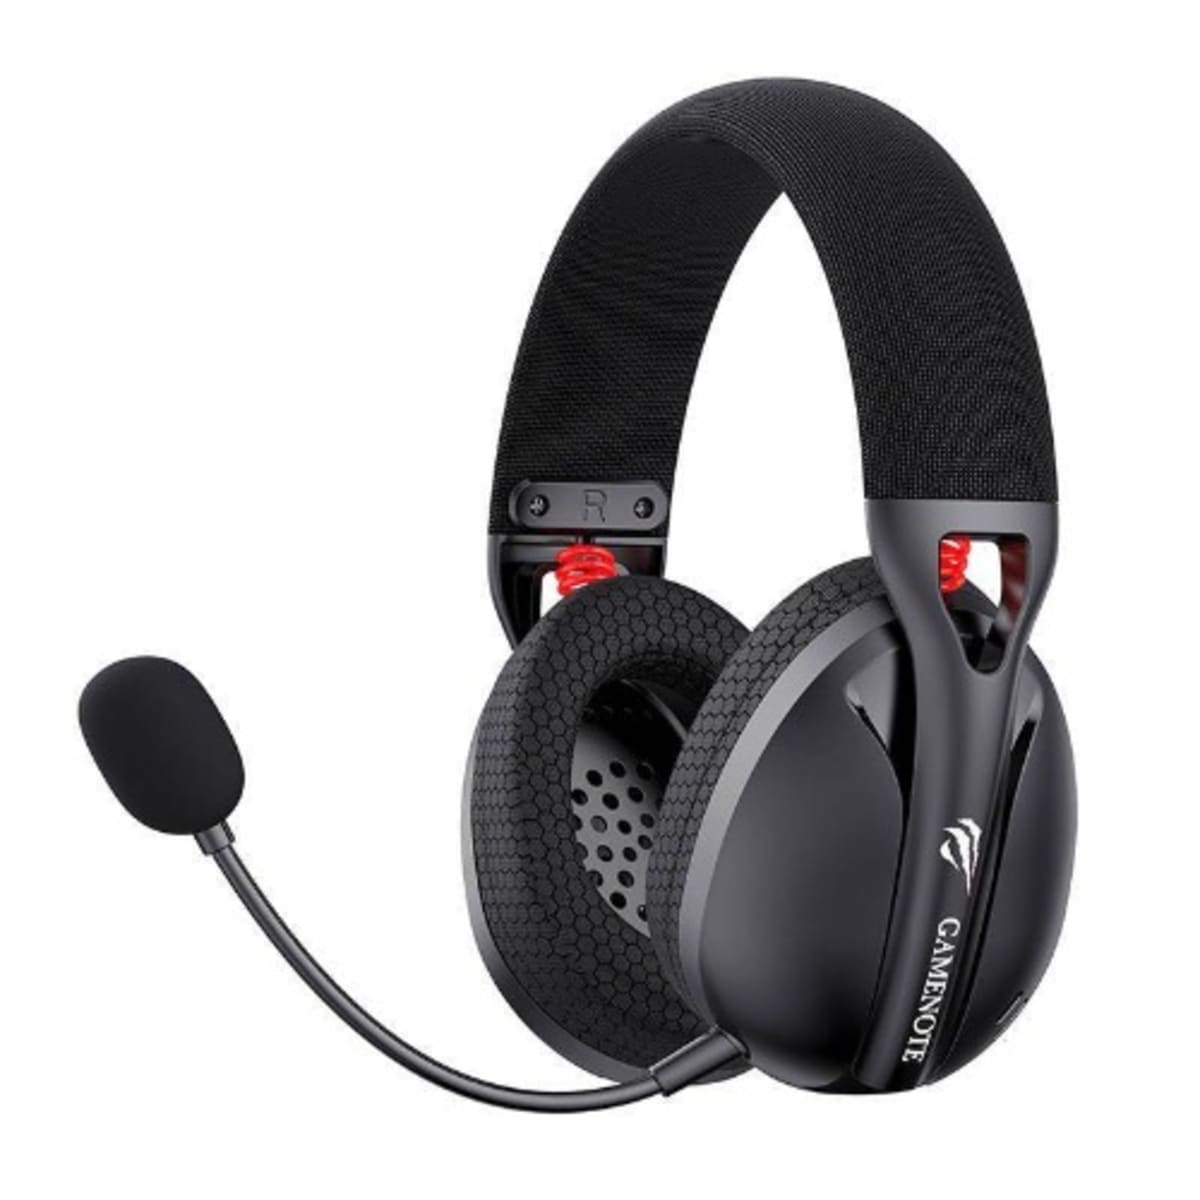 Astro Gaming A30 Wireless Gaming Headset Buyer's Guide